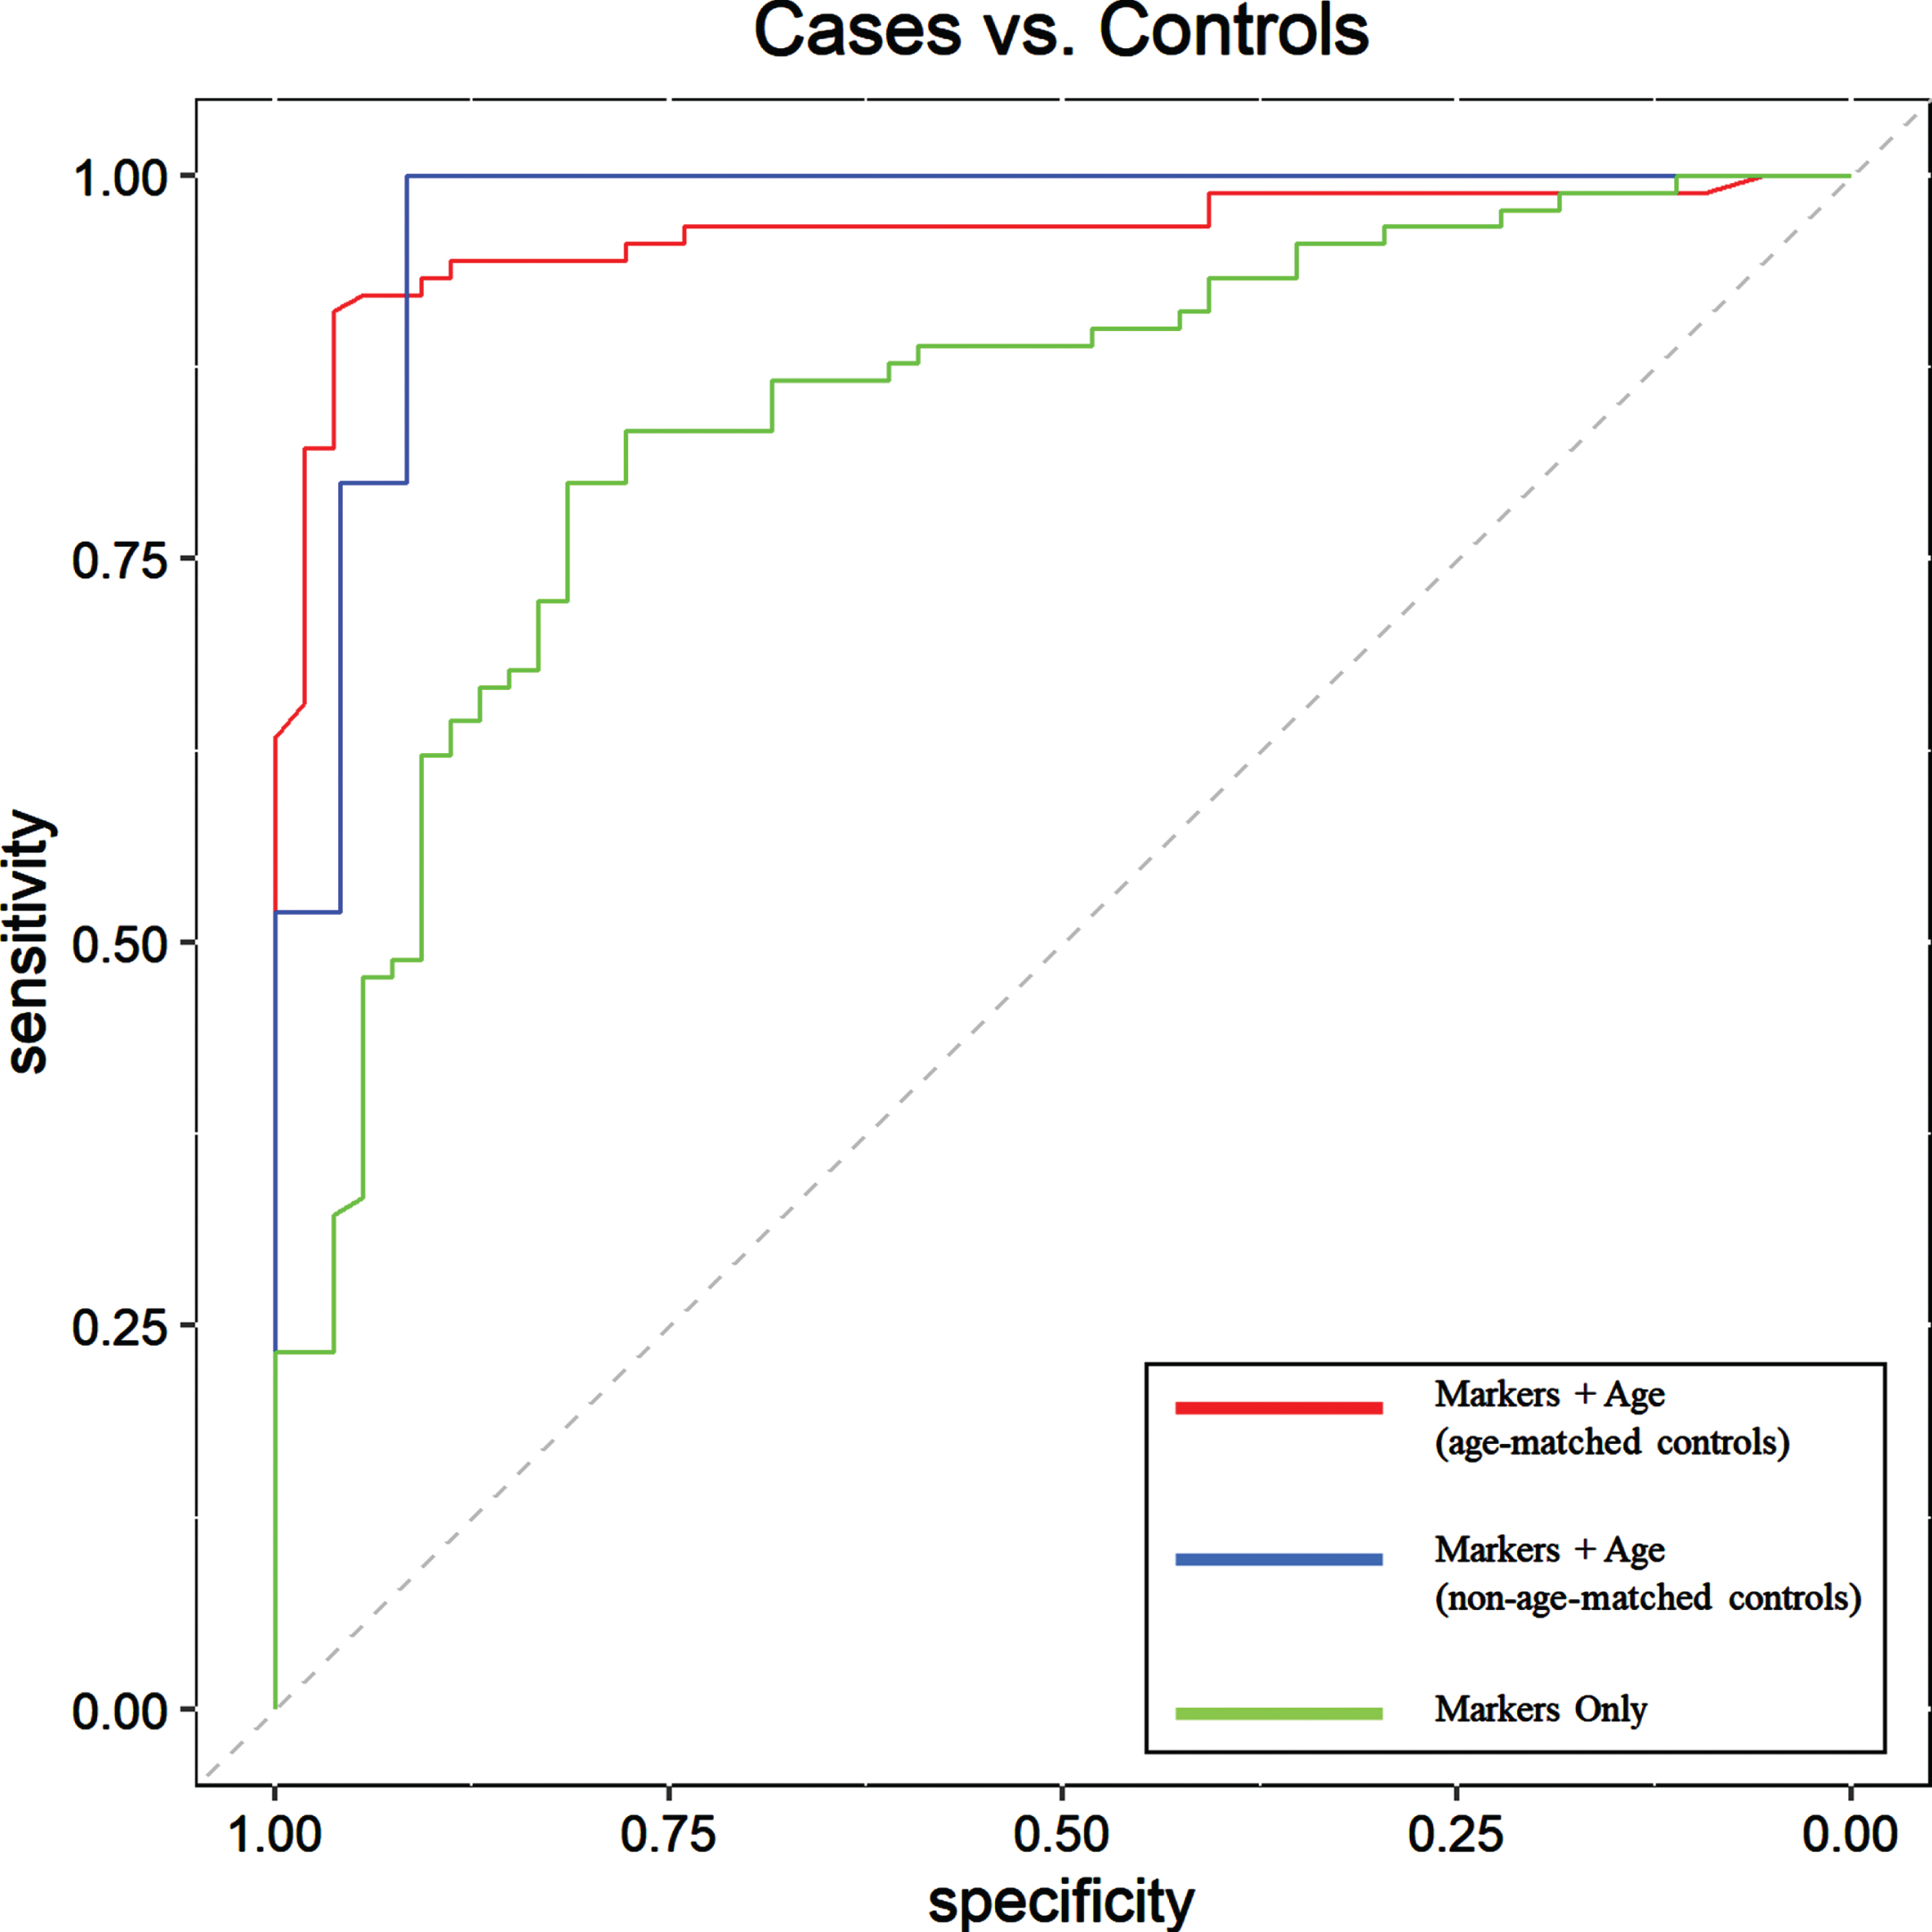 Receiver Operating Characteristic (ROC) curve assessment of aAB biomarkers for detection of AD-related pathology in Testing Set subjects; cases (pre-symptomatic, prodromal, and mild-moderate AD) (n = 90) versus cognitively normal controls (n = 54) when used alone (green line), with age as an additional parameter (blue line) in a group with non-age-matched controls, and with age as an additional parameter with a more closely age-matched control group (red line). Results show that inclusion of age as an additional parameter significantly increases overall diagnostic accuracy and, thus, the overall utility of the test. The dashed line represents the line of no discrimination. The ROC area under the curve (AUC), sensitivity, specificity, PPV, NPV, and overall accuracy values are shown in Table 3.